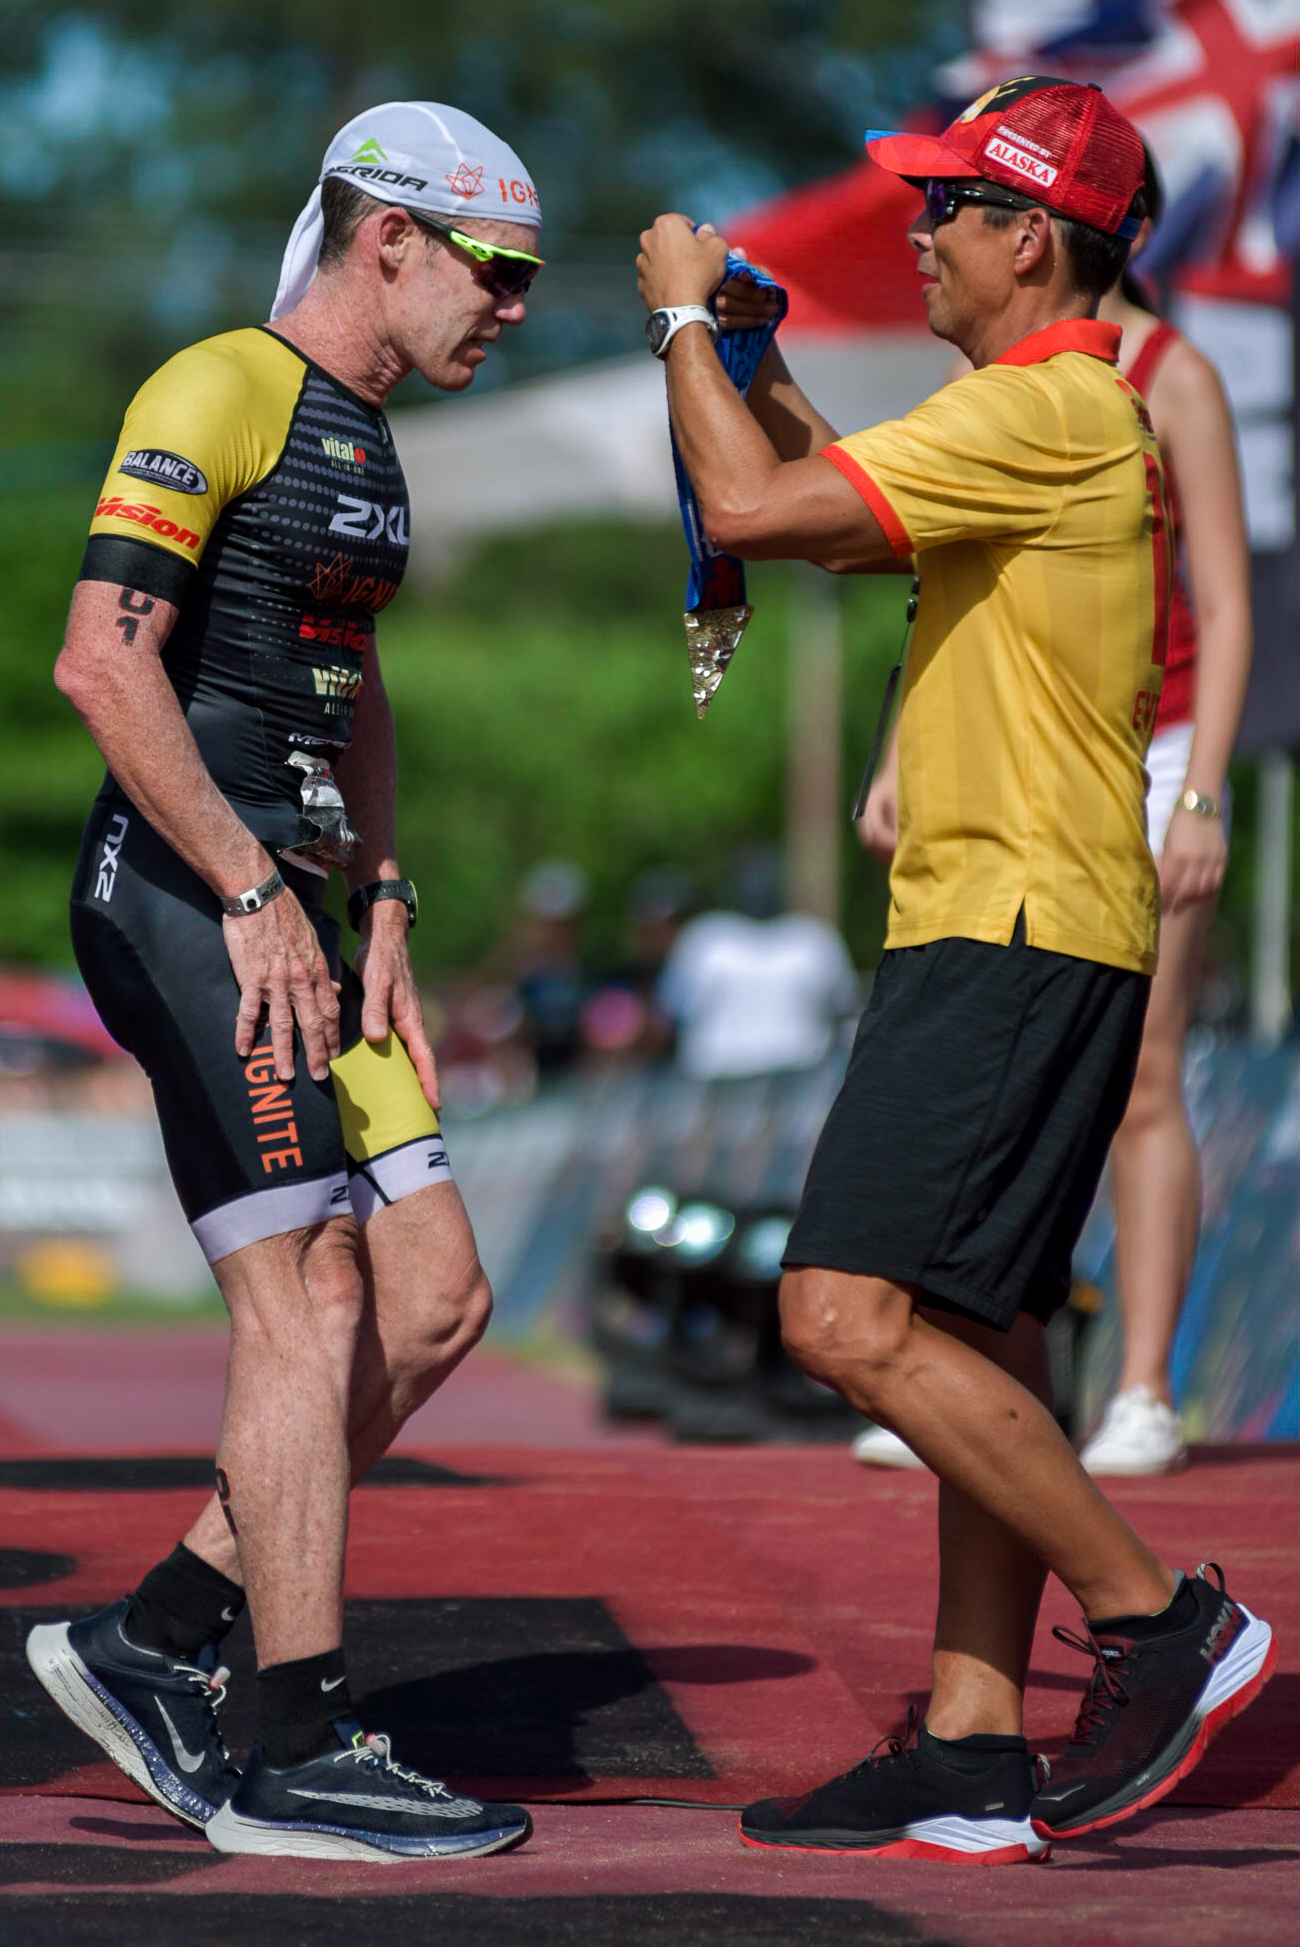 Sunrise Events founder Fred Uytengsu and 12-time Ironman New Zealand champion Cameron Brown